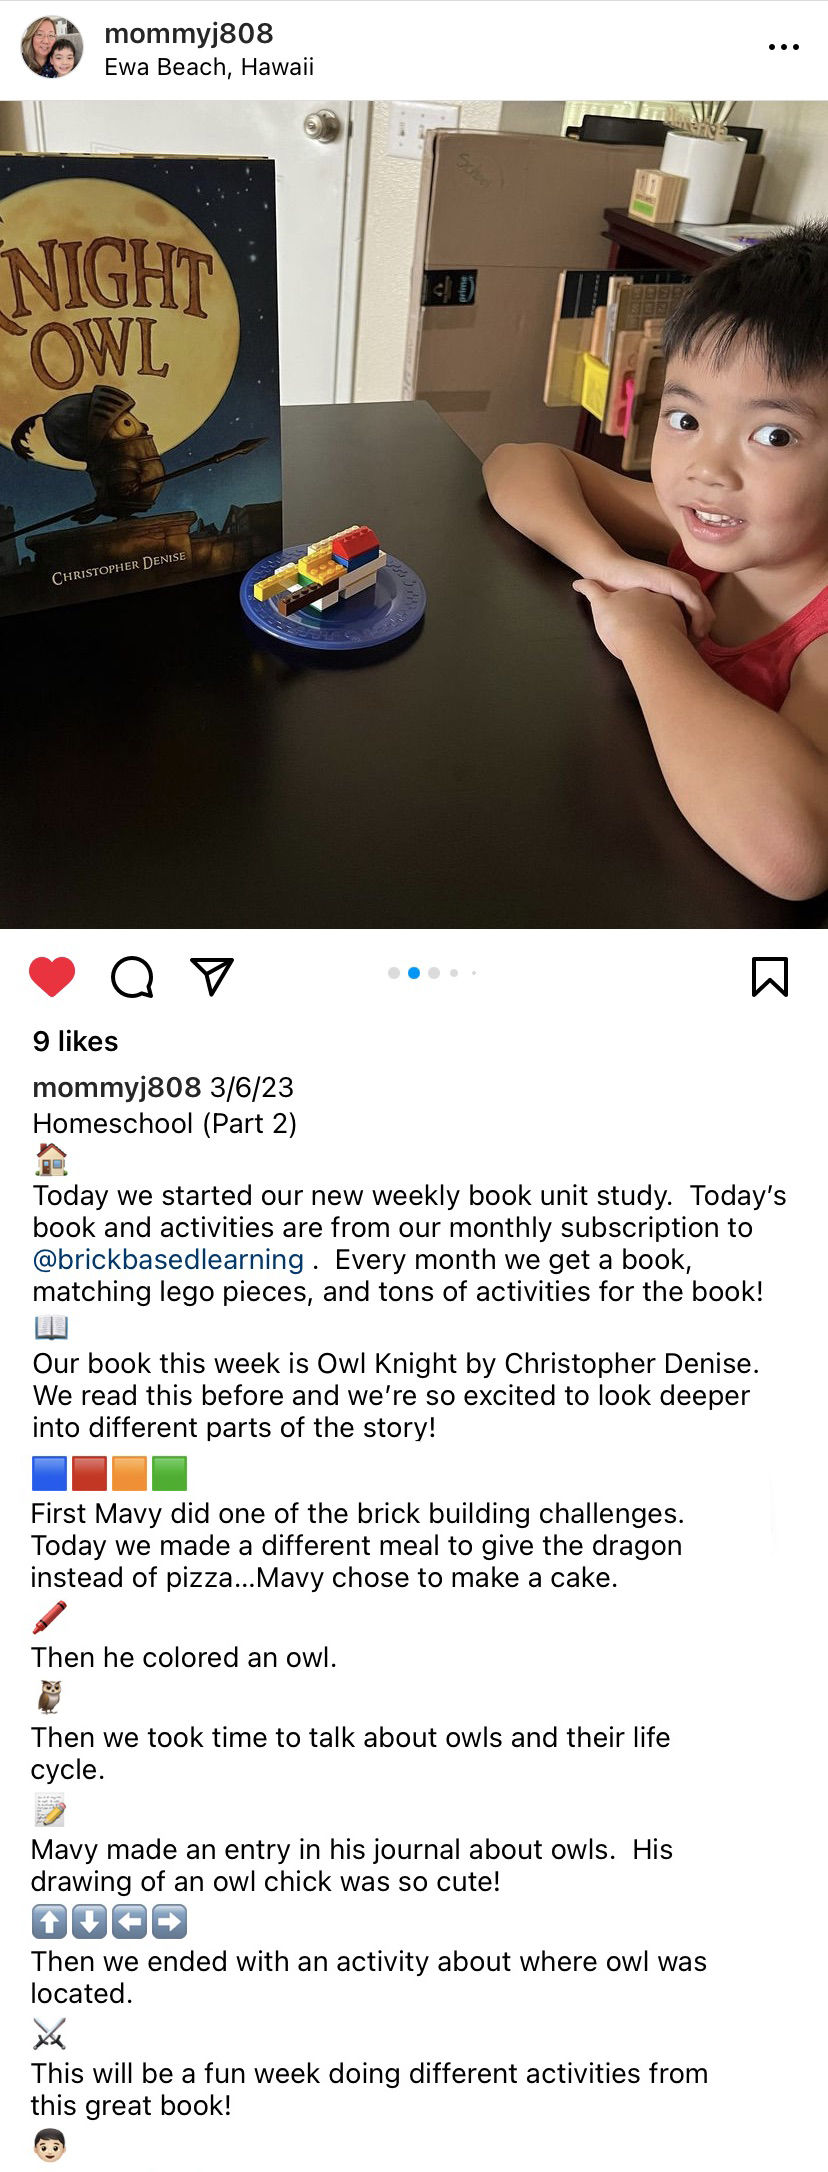 IG post from homeschooling mom using Brick Based Learning's monthly kits 